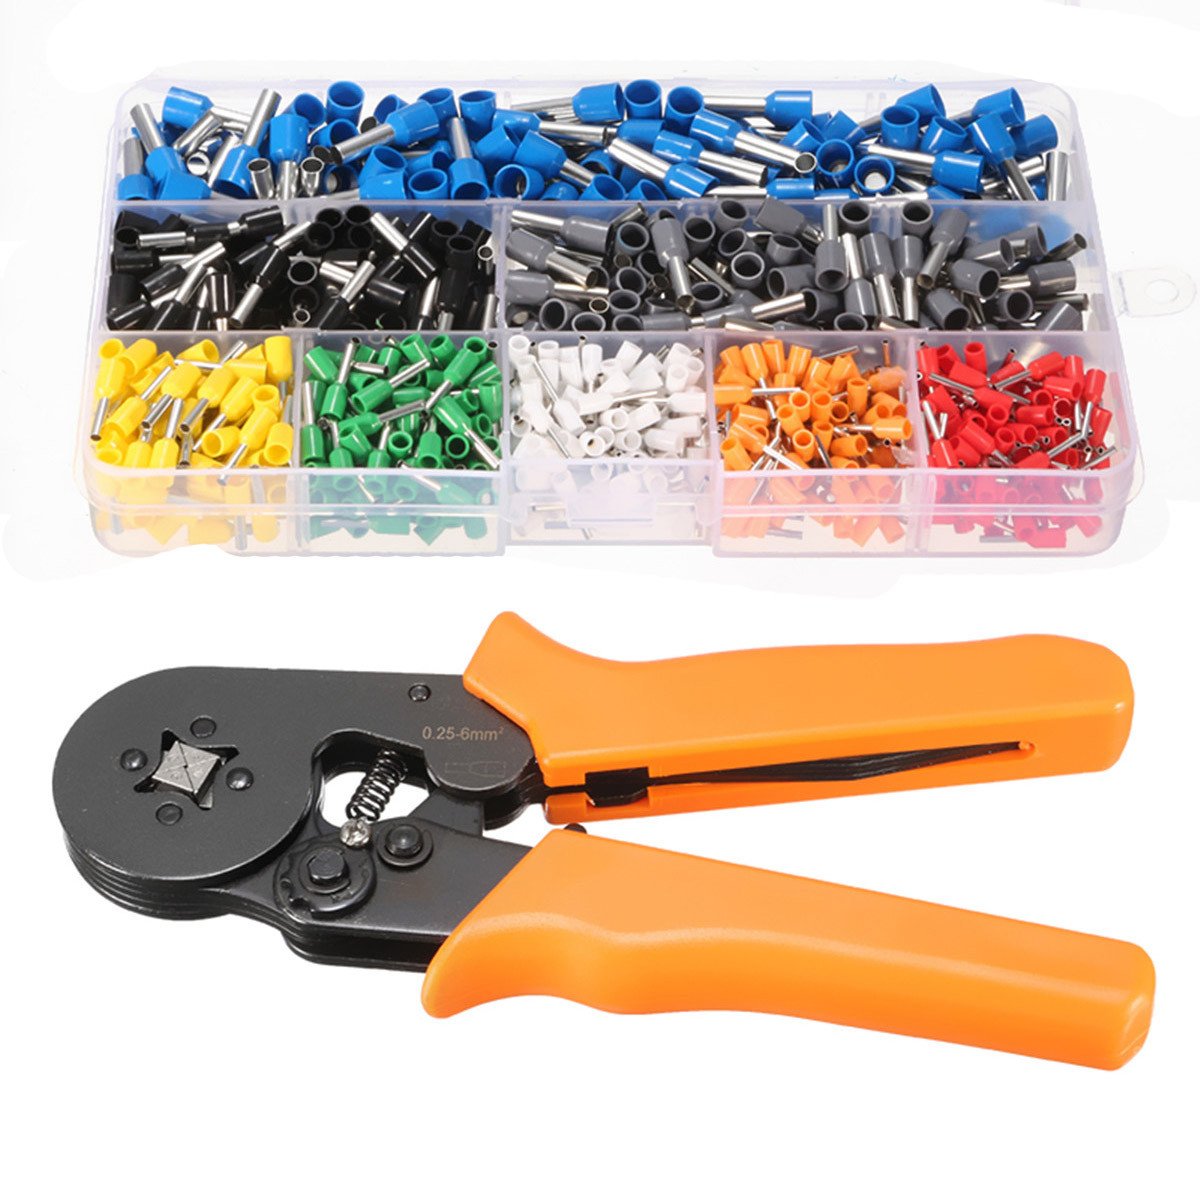 DANIU 23AWG to 10AWG Self Adjusting Ratcheting Ferrule Crimper Plier Tool with 800pcs Connector Terminal 1